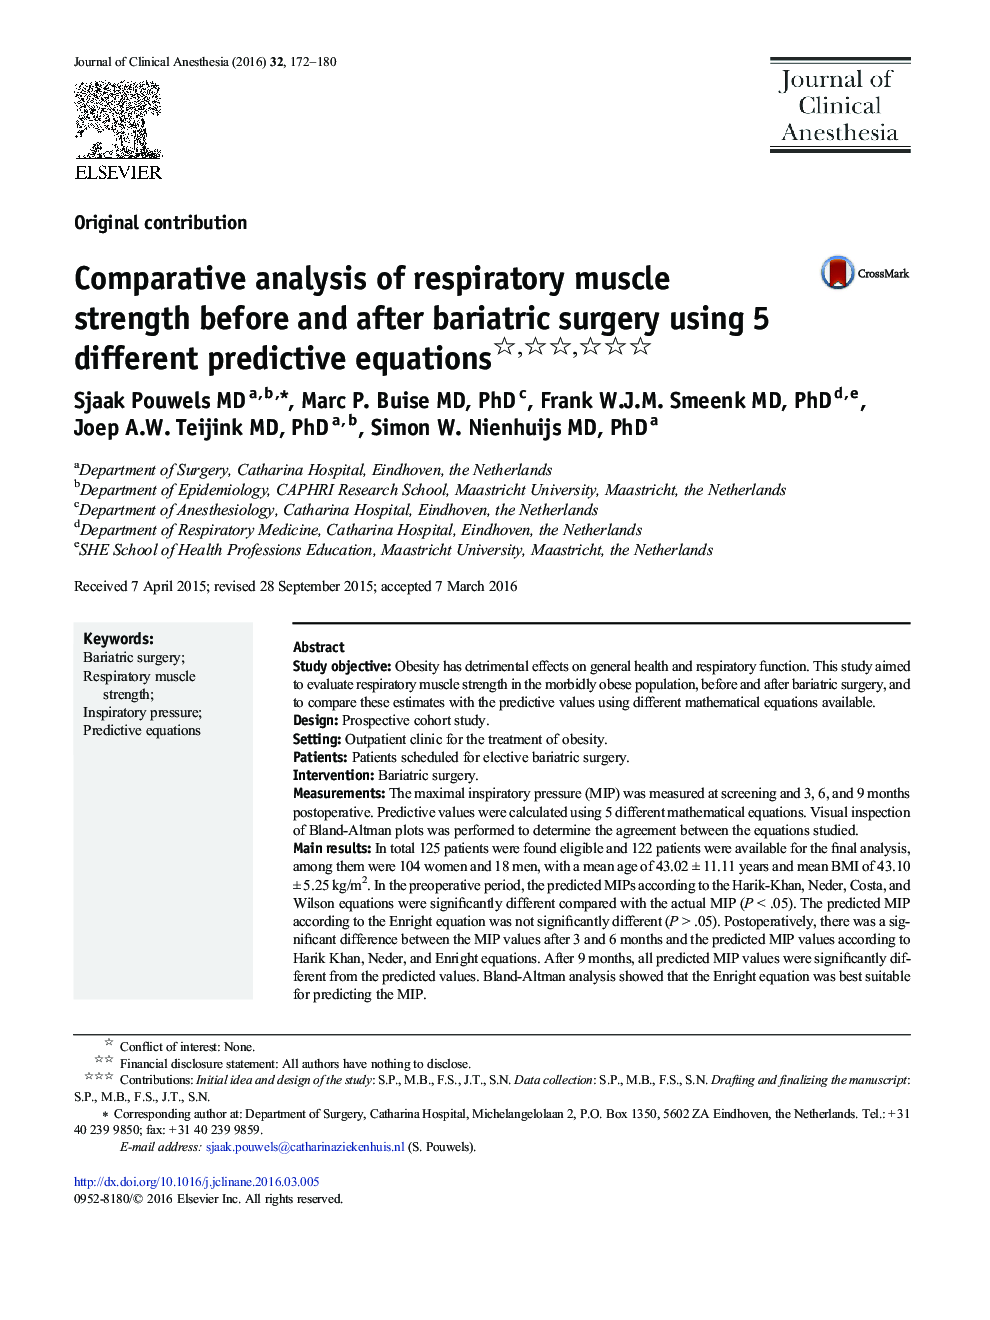 Comparative analysis of respiratory muscle strength before and after bariatric surgery using 5 different predictive equations